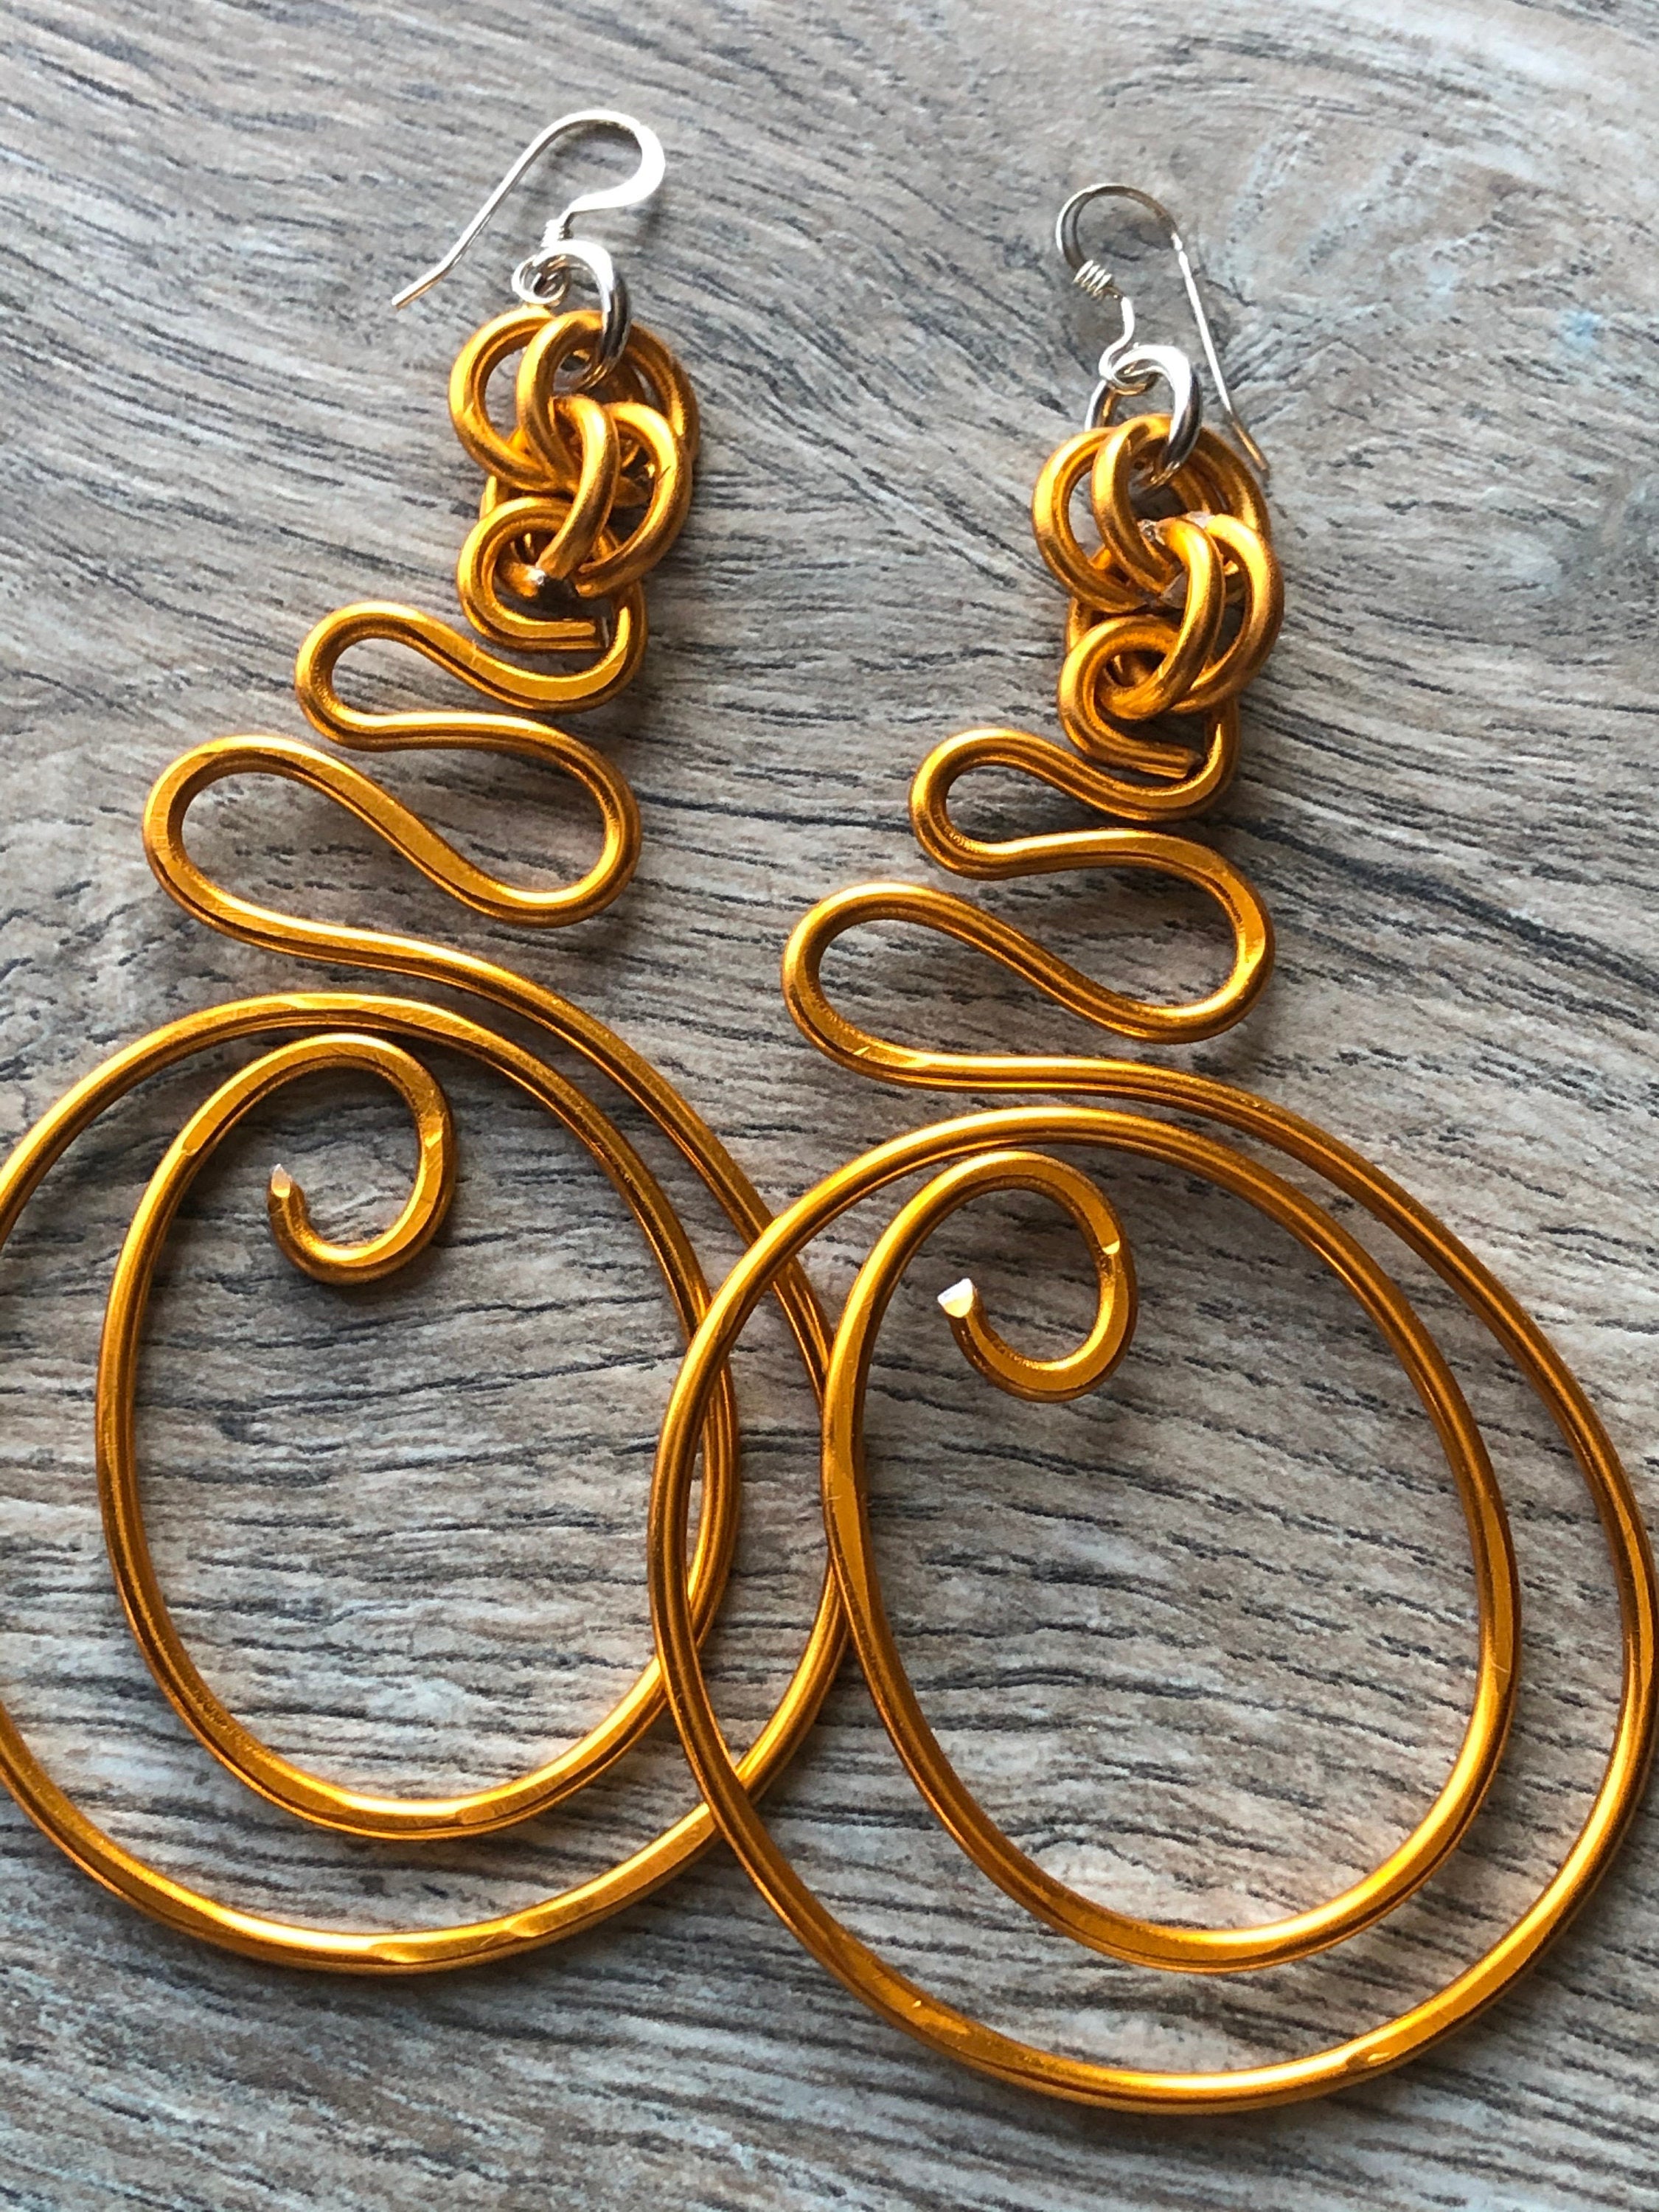 Gold Round Wire Earrings with sterling silver ear wire, Light weight fun big earrings